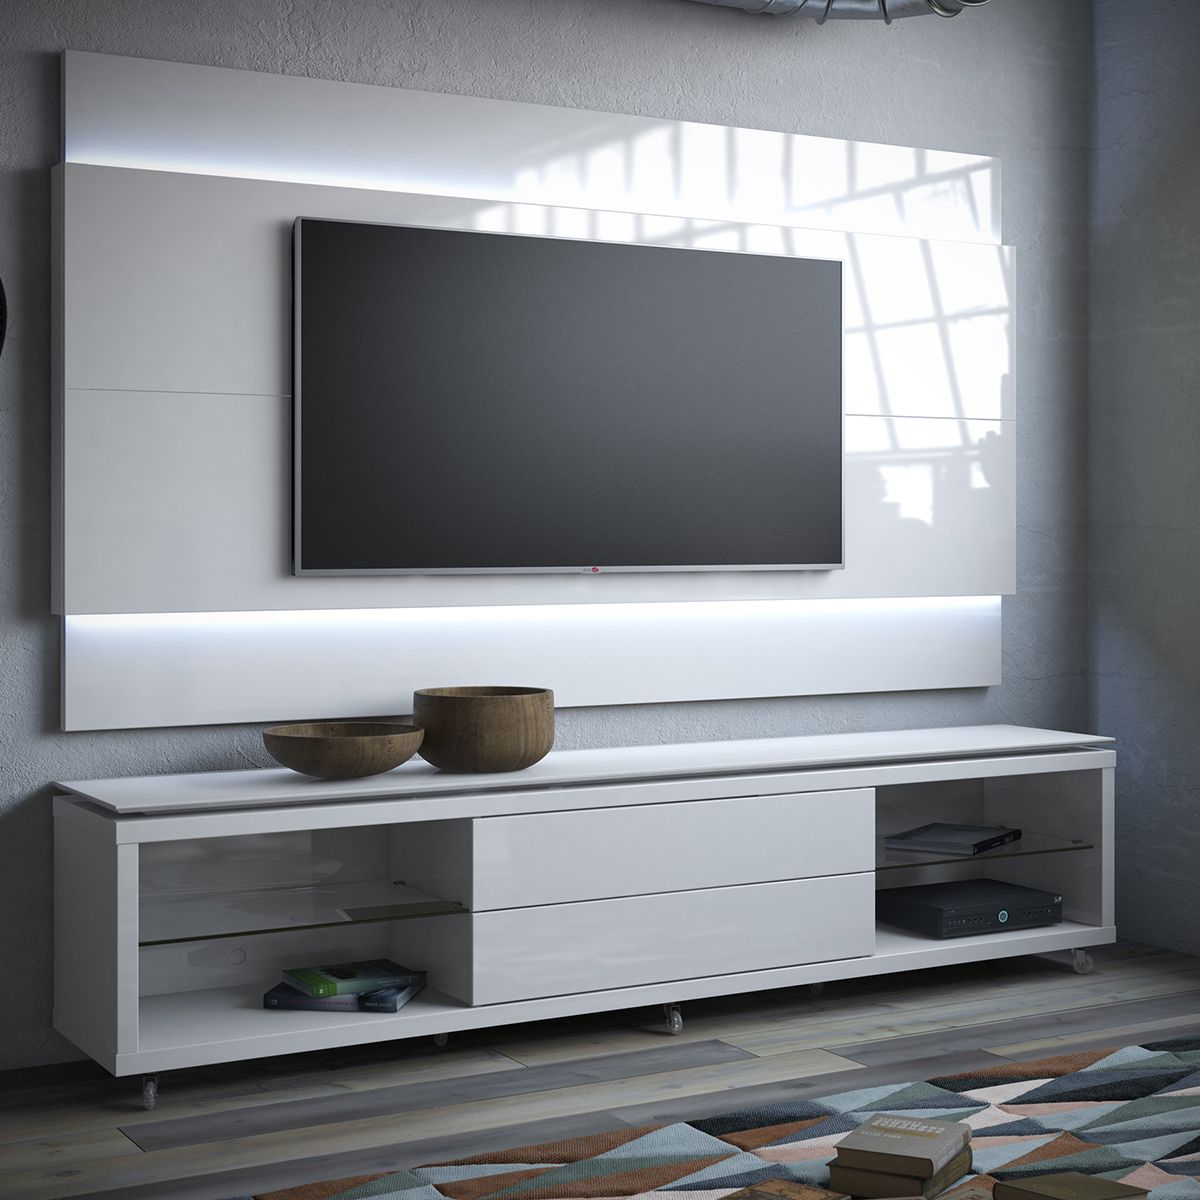 White Wall Mount Tv Stand High Gloss Mounted Unit Cabinet Galaxy Regarding Famous White Wall Mounted Tv Stands (View 16 of 20)